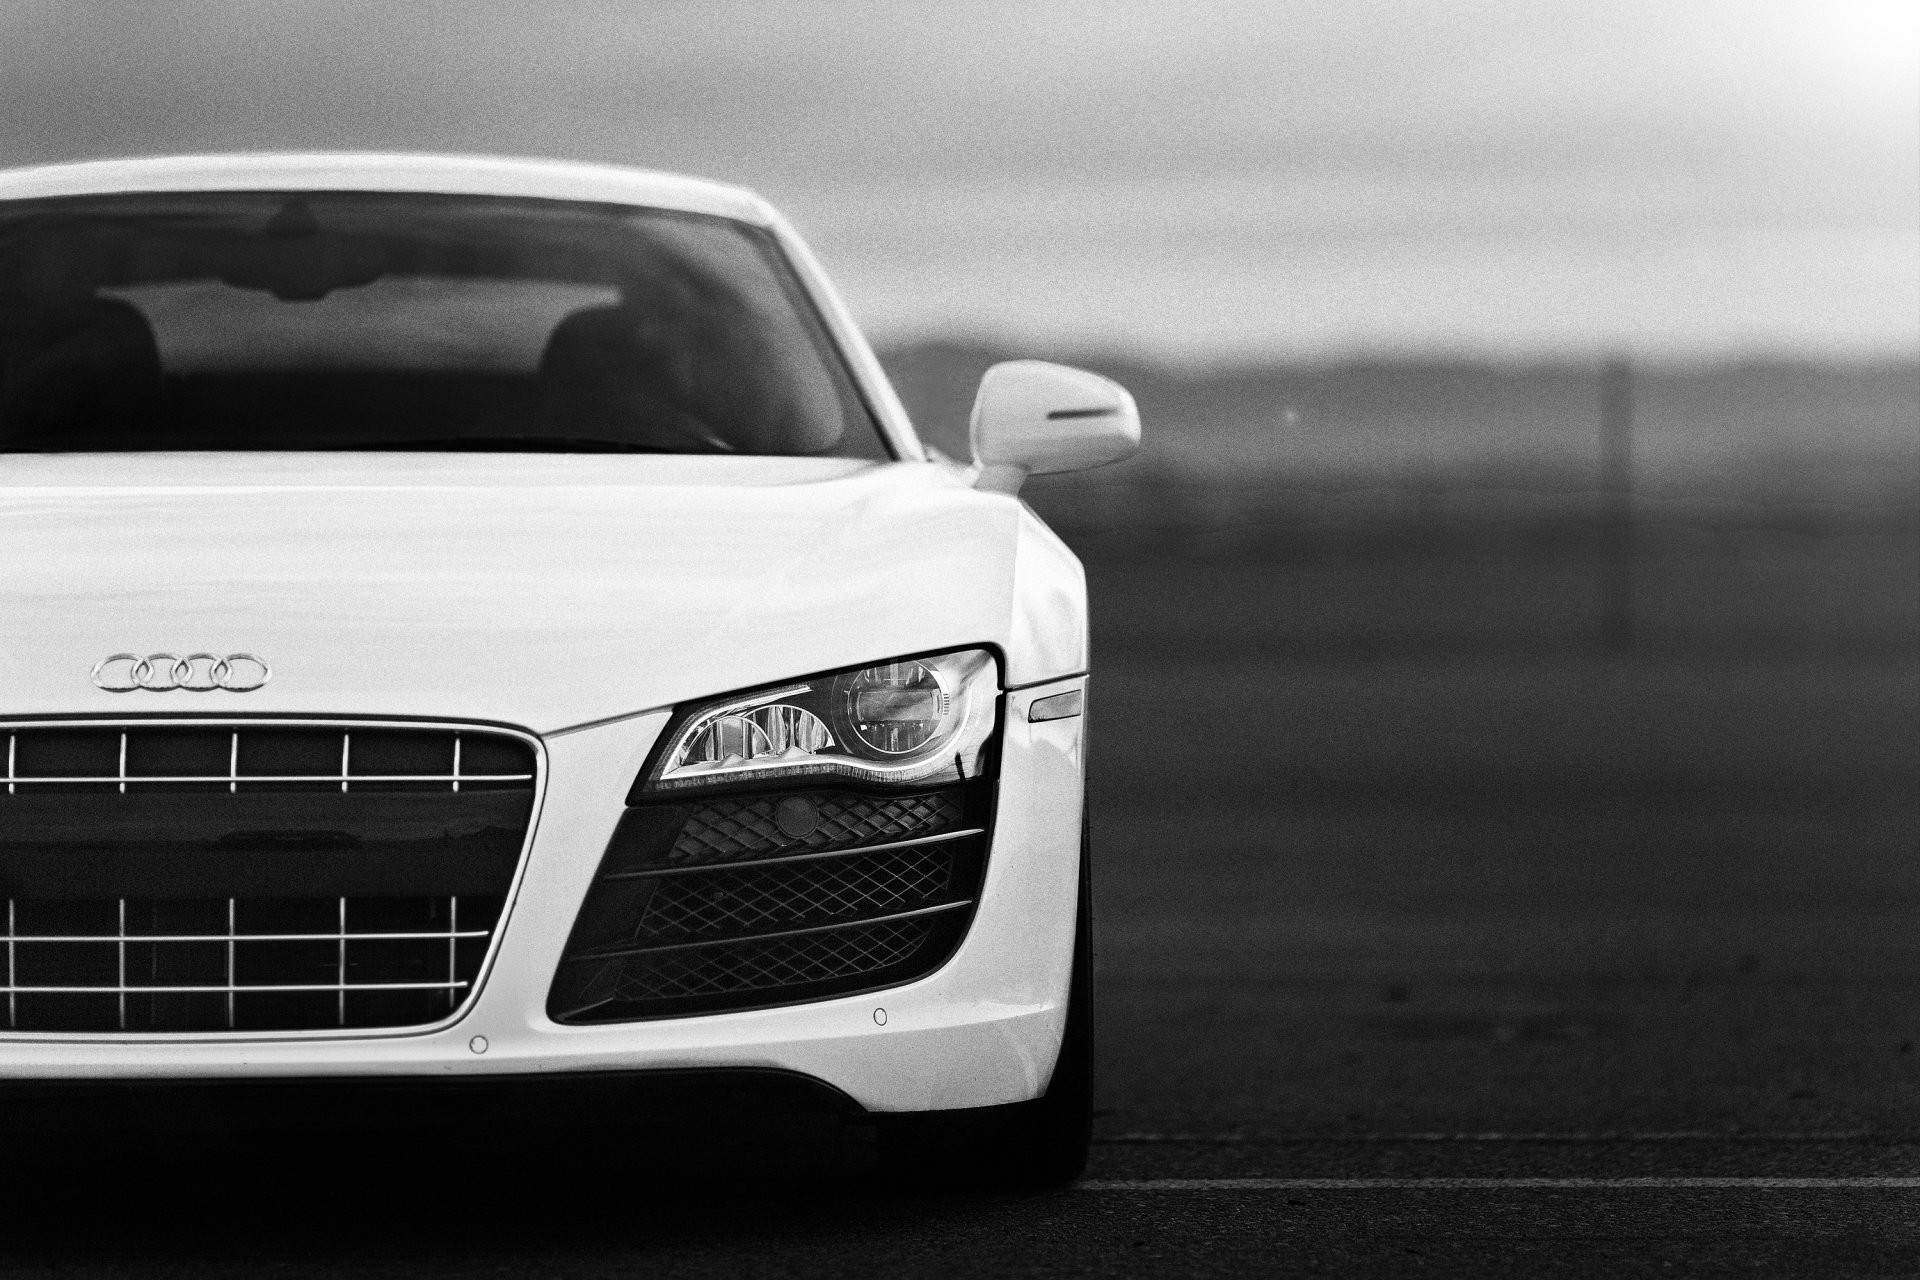 Audi R8 Special Edition, HD Cars, 4k Wallpapers, Images, Backgrounds,  Photos and Pictures